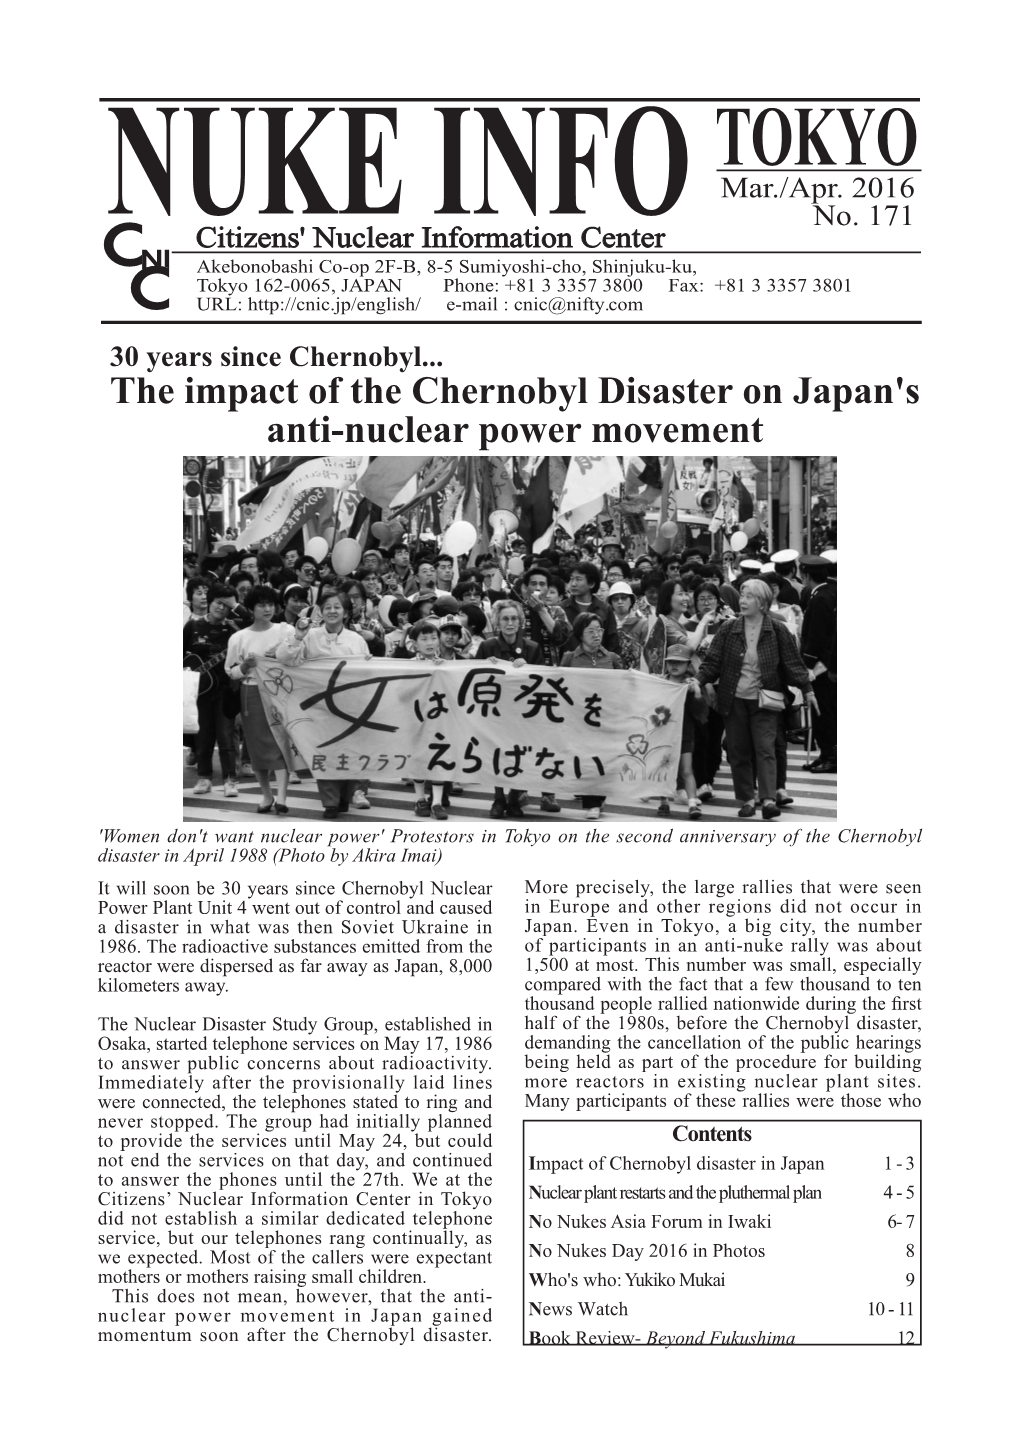 The Impact of the Chernobyl Disaster on Japan's Anti-Nuclear Power Movement